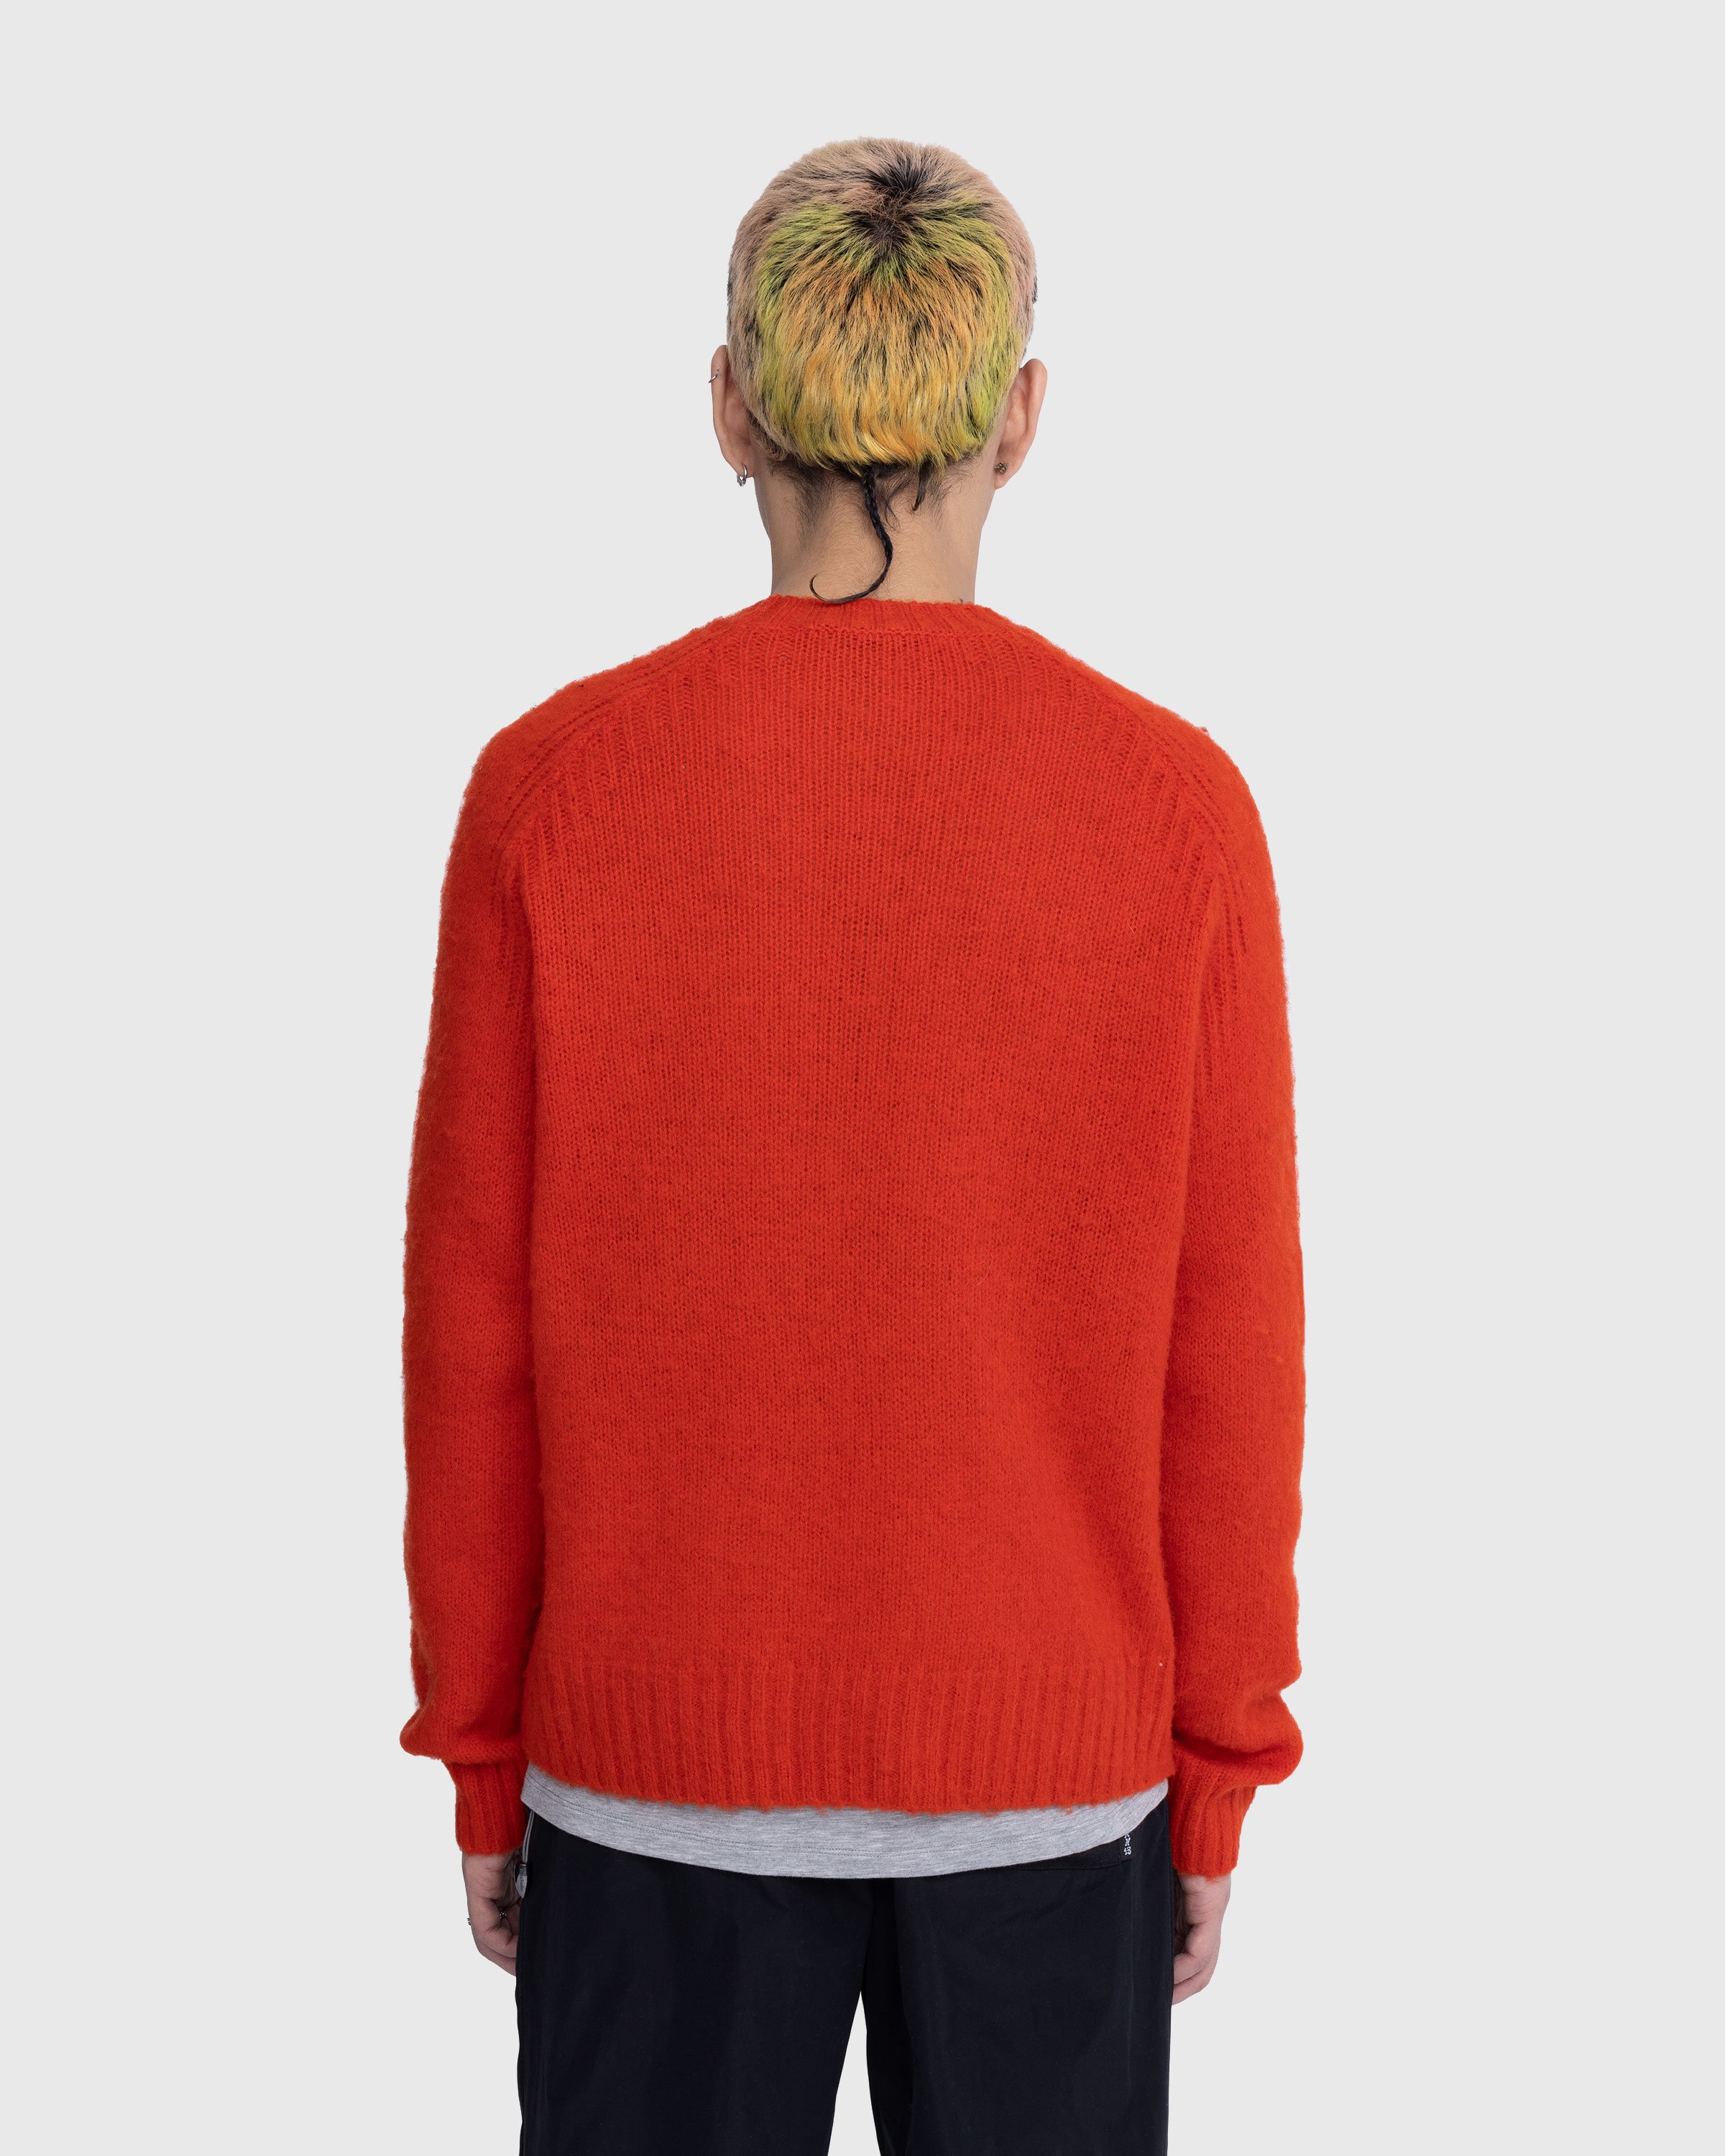 Acne Studios - Embroidered Crewneck Sweater Red - Clothing - Red - Image 3